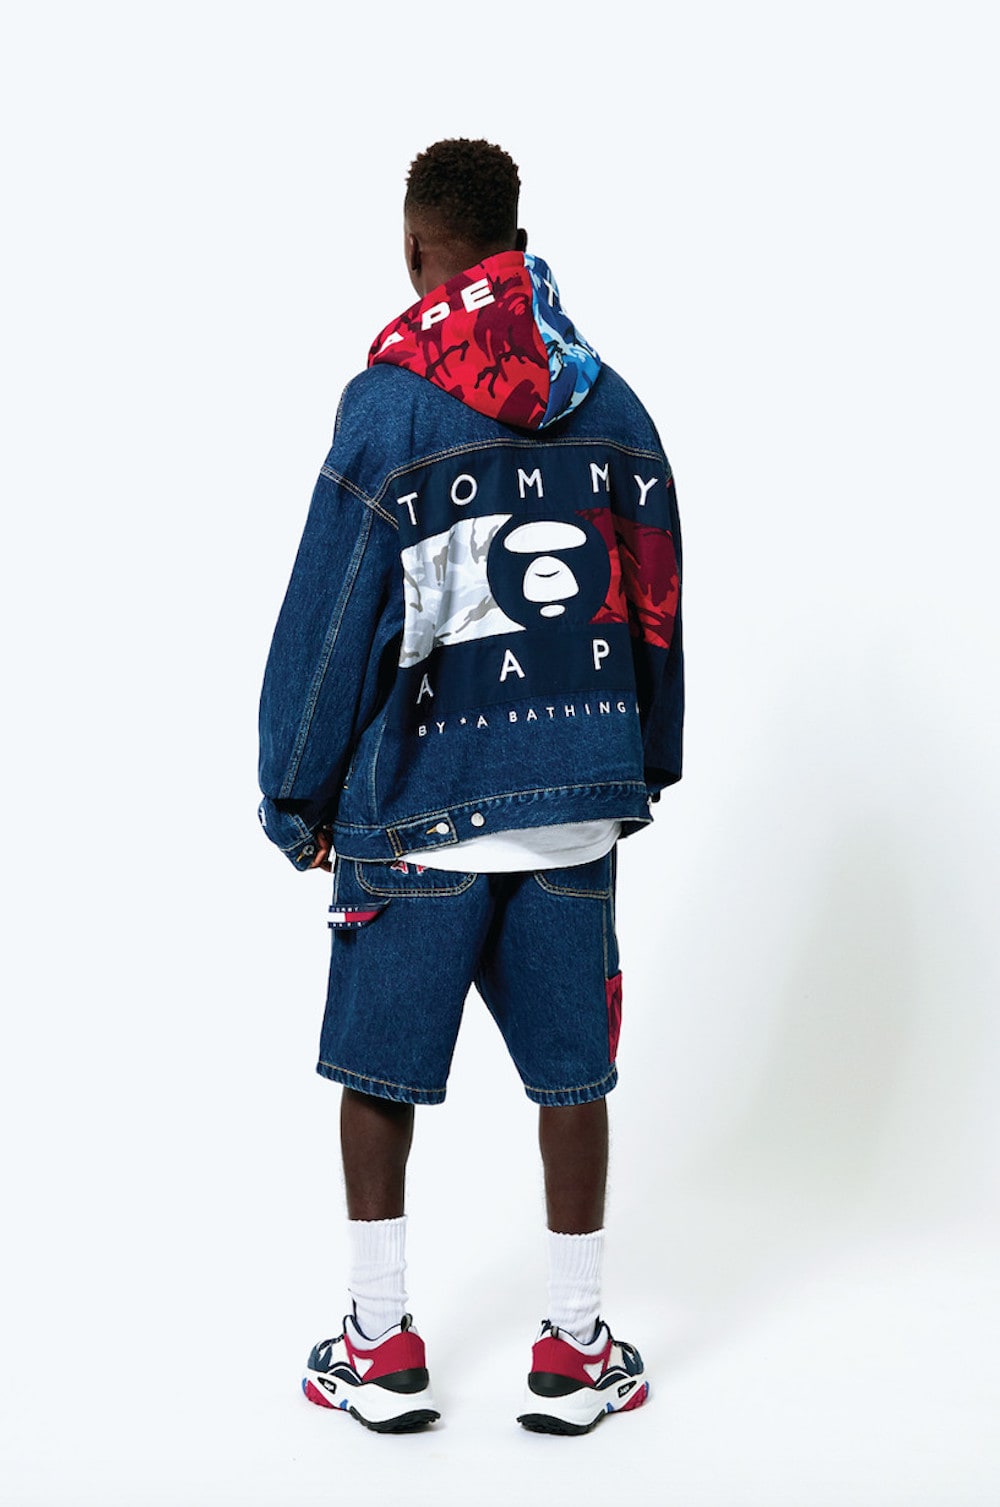 Tommy Hilfiger and A Bathing Ape AAPE